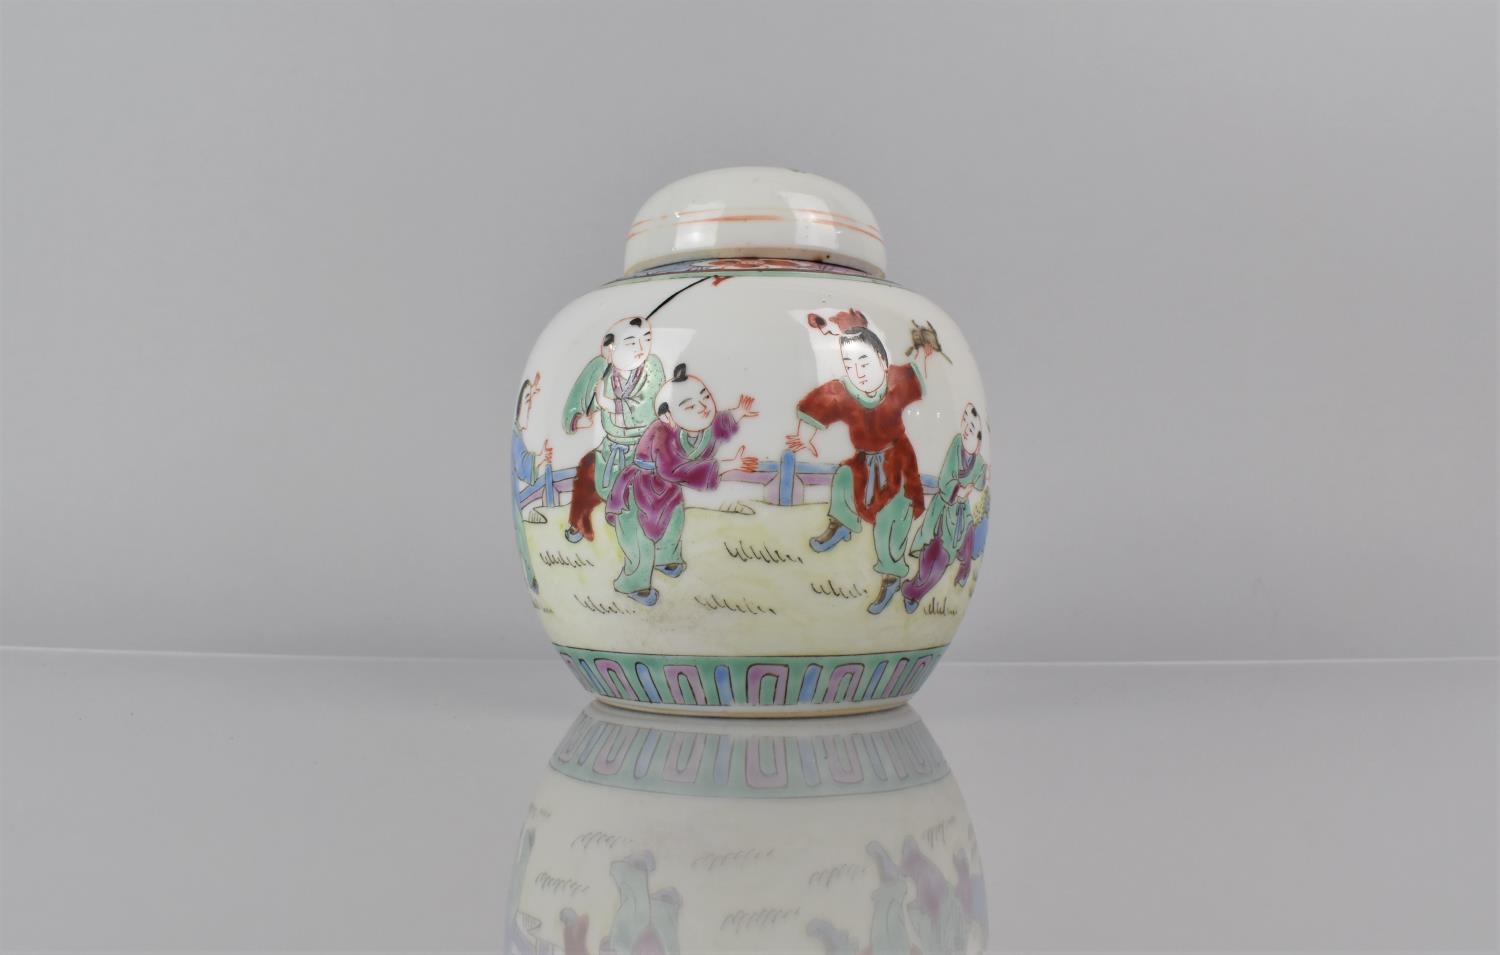 A 20th Century Chinese Porcelain Ginger Jar and Cover Decorated in Polychrome Enamels with